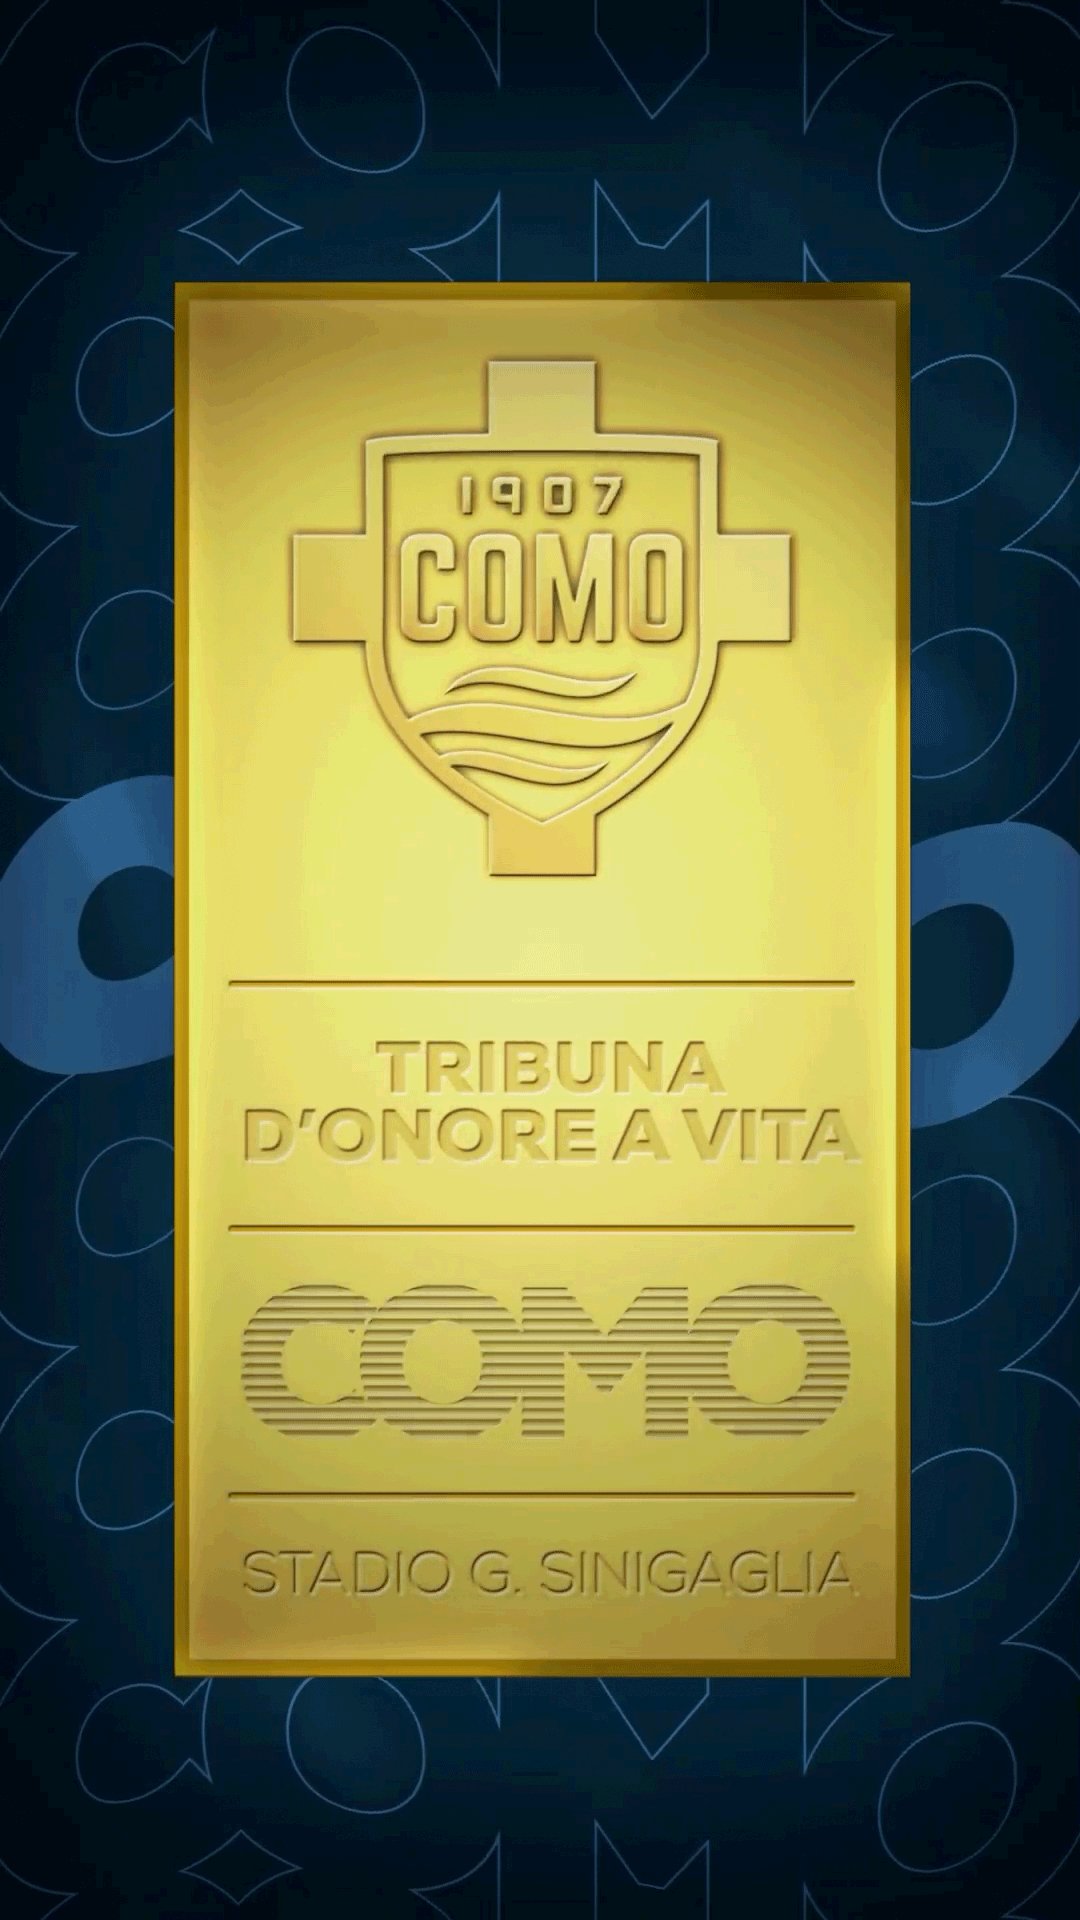 Football team Como 1907 releases charity NFT auction